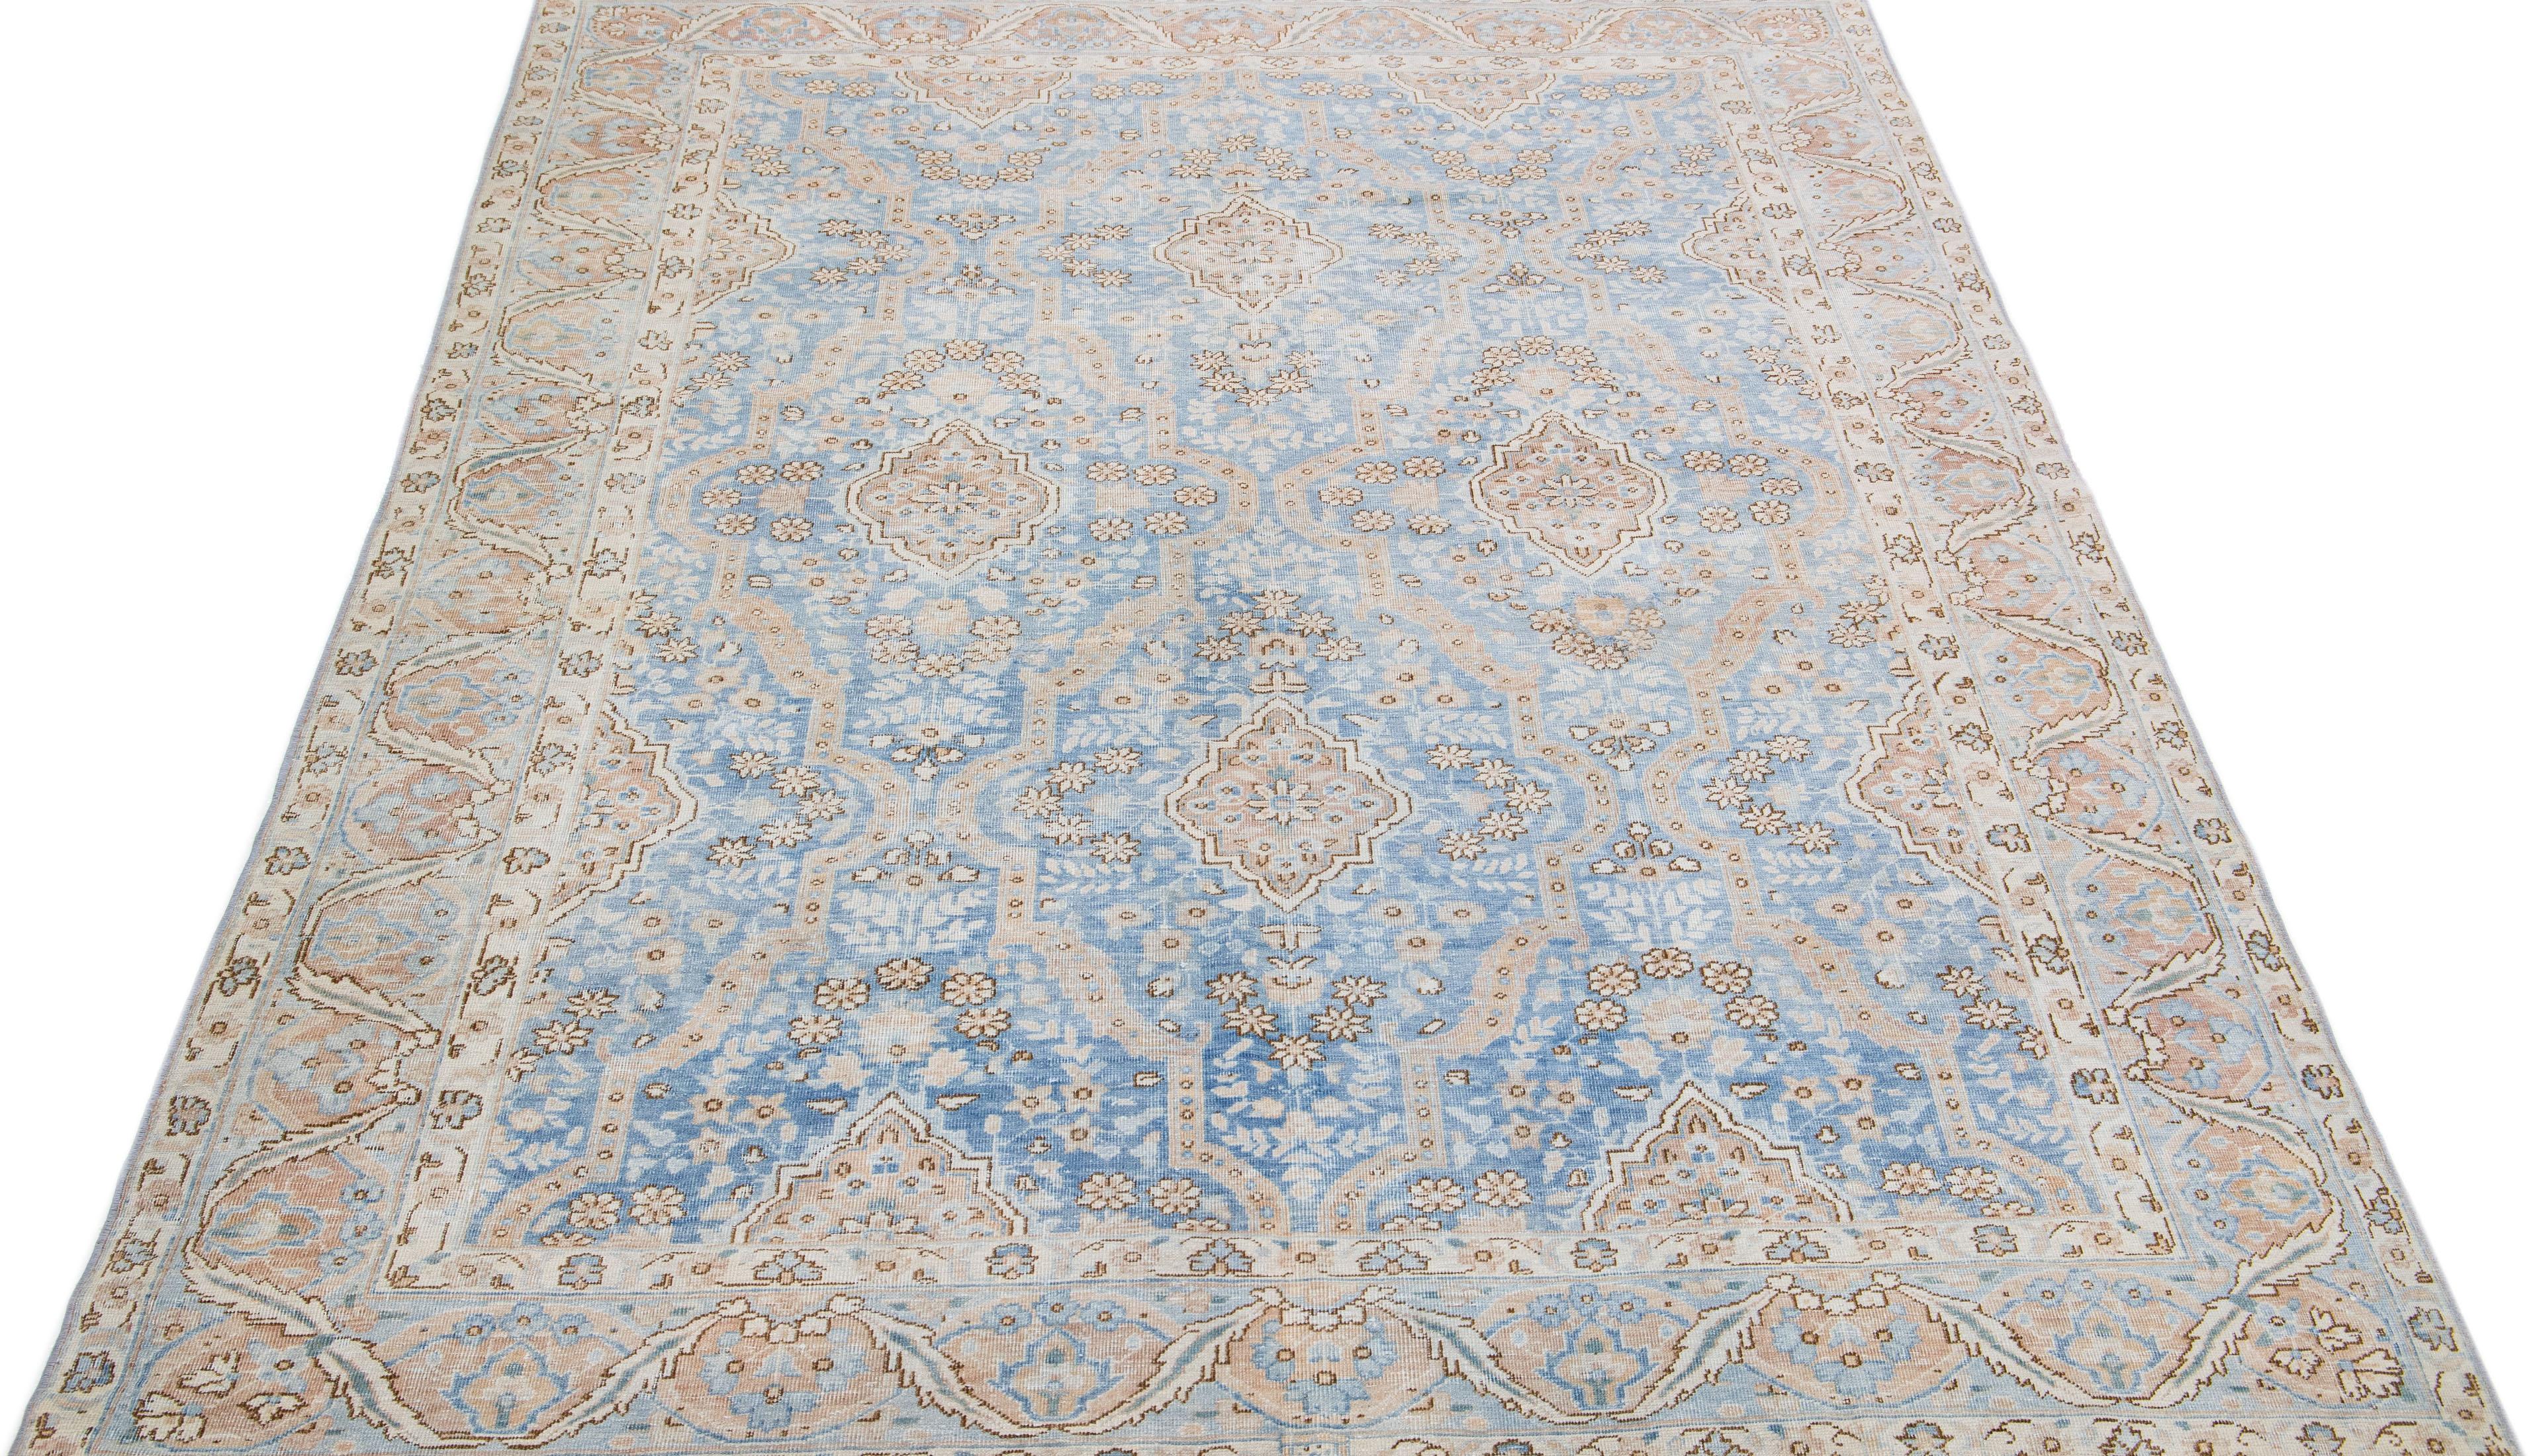 Beautiful antique Tabriz hand-knotted wool rug with a blue color field. This Persian rug has a designed frame with brown and beige accents in a gorgeous all-over floral design.

This rug measures: 6'5